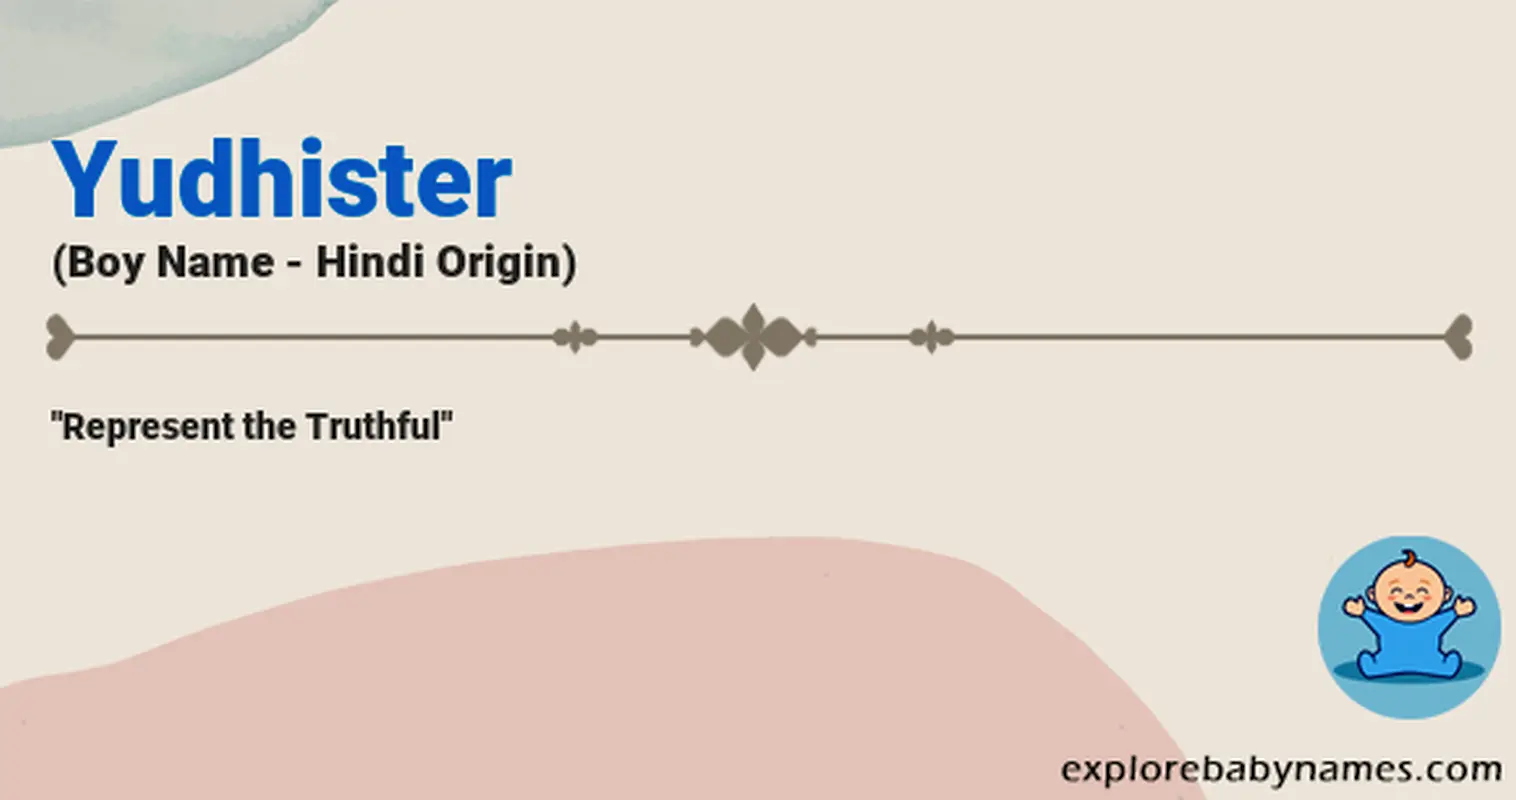 Meaning of Yudhister